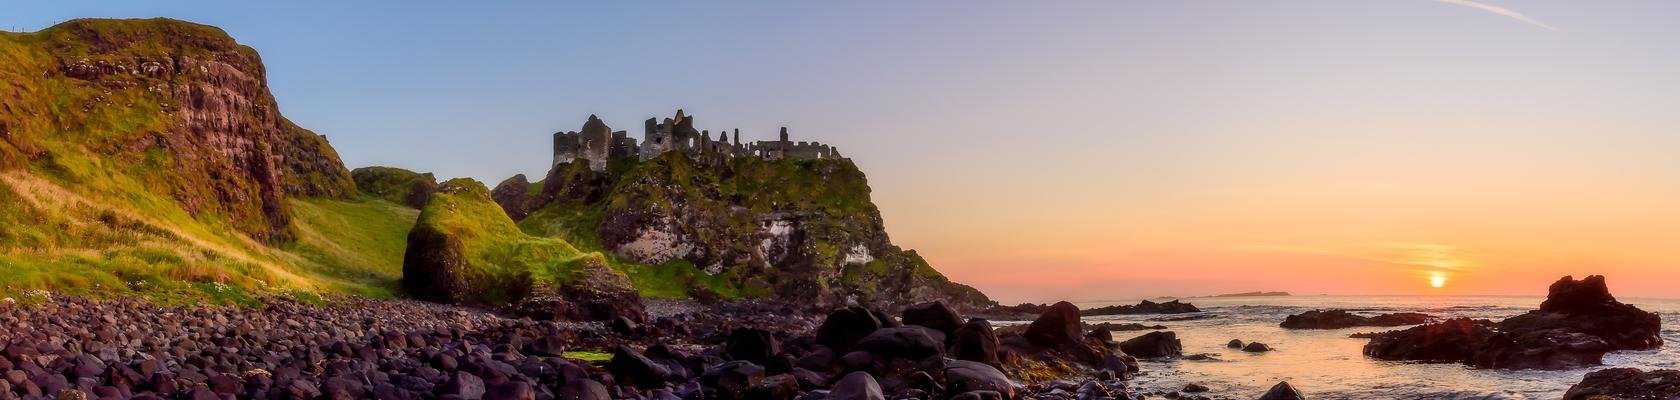 Dunluce Castle uit Game of Thrones - County Antrim